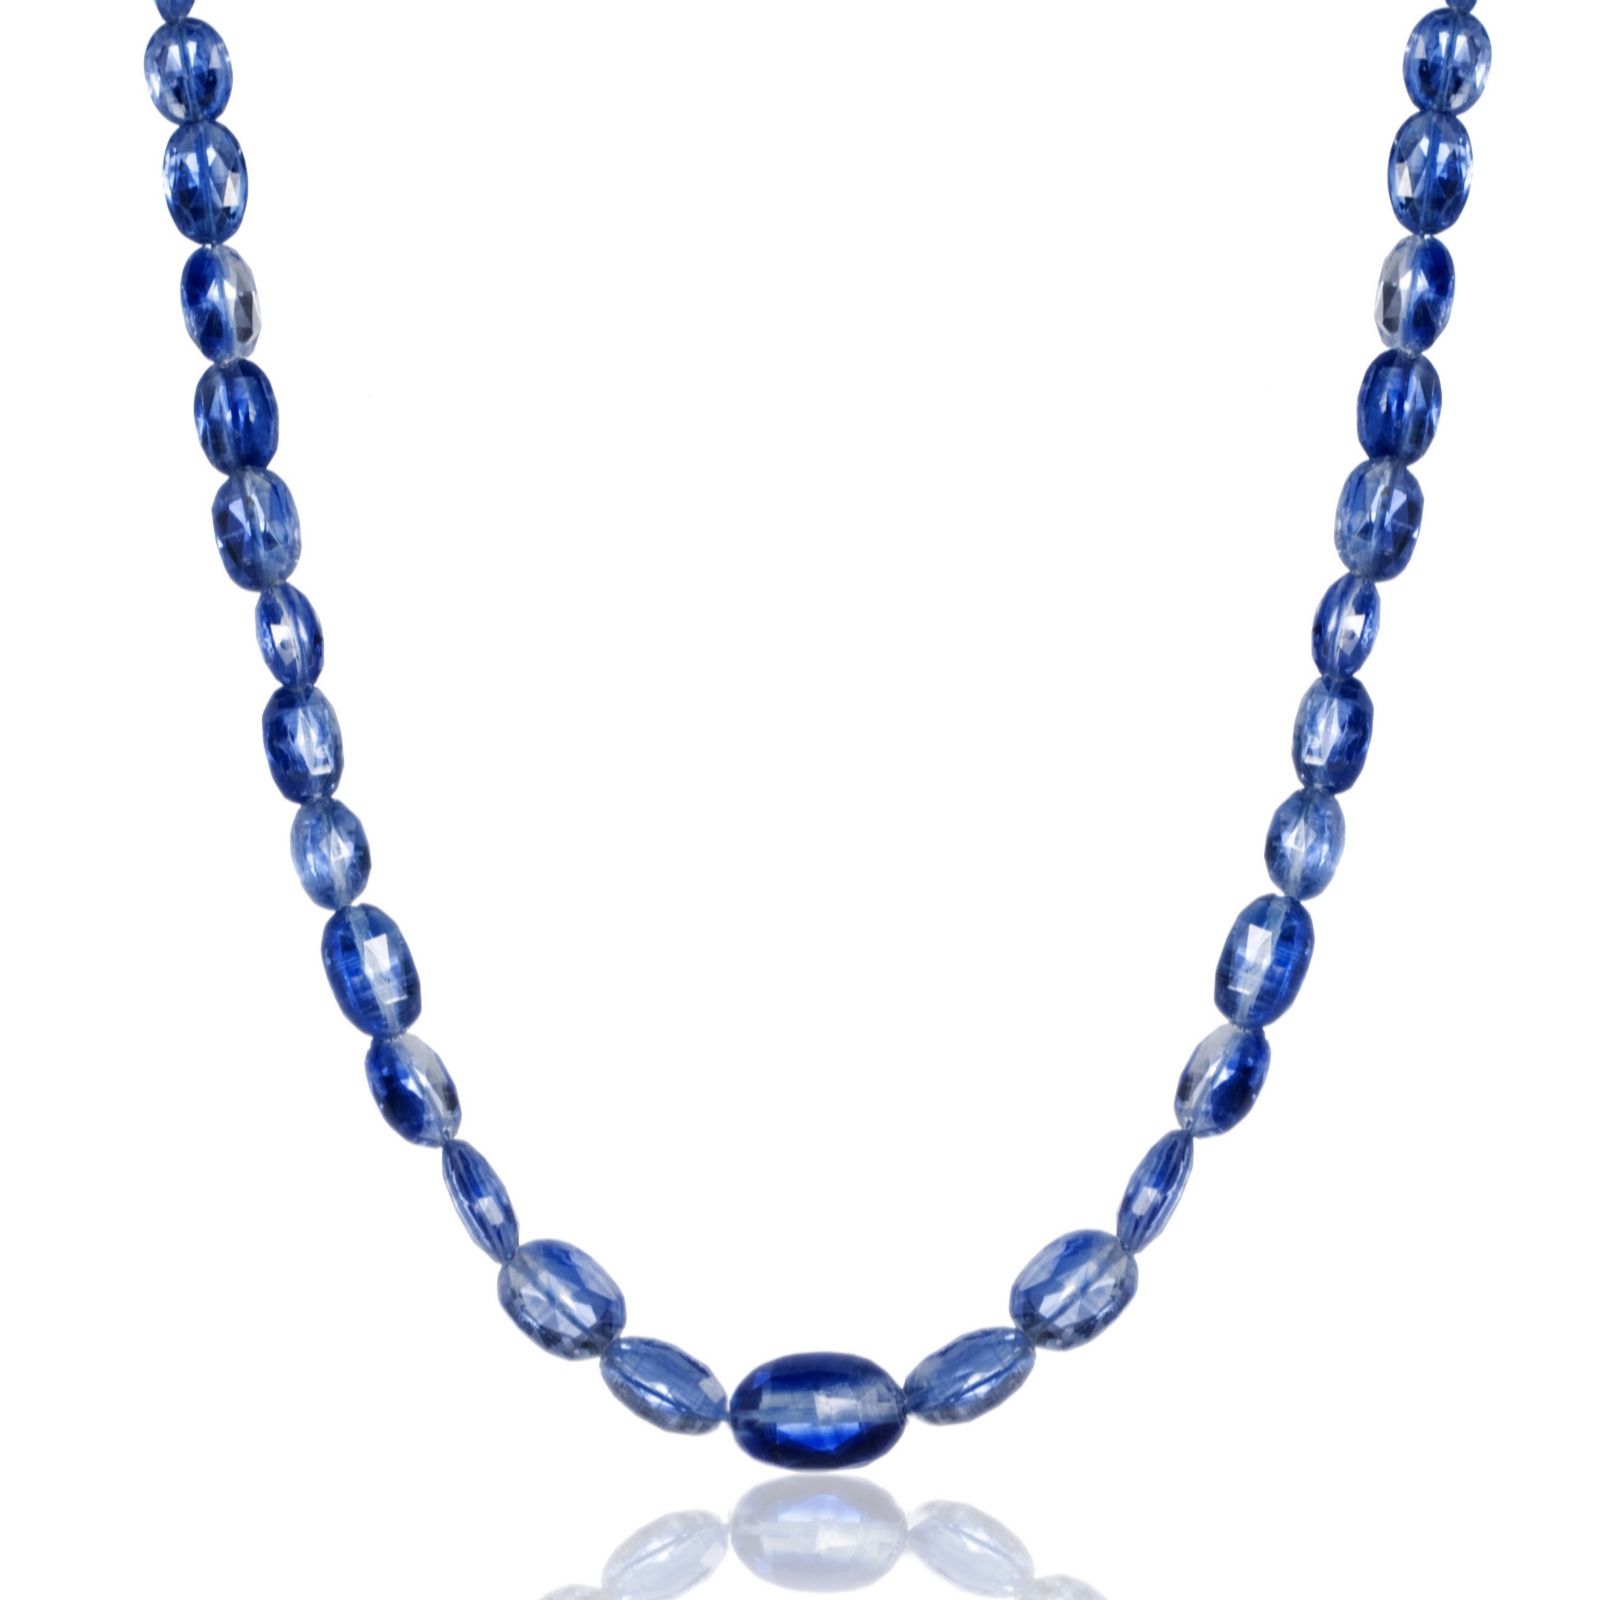 70ct Nepalese Kyanite 45cm Bead Strand Necklace 9ct Gold - QVC UK